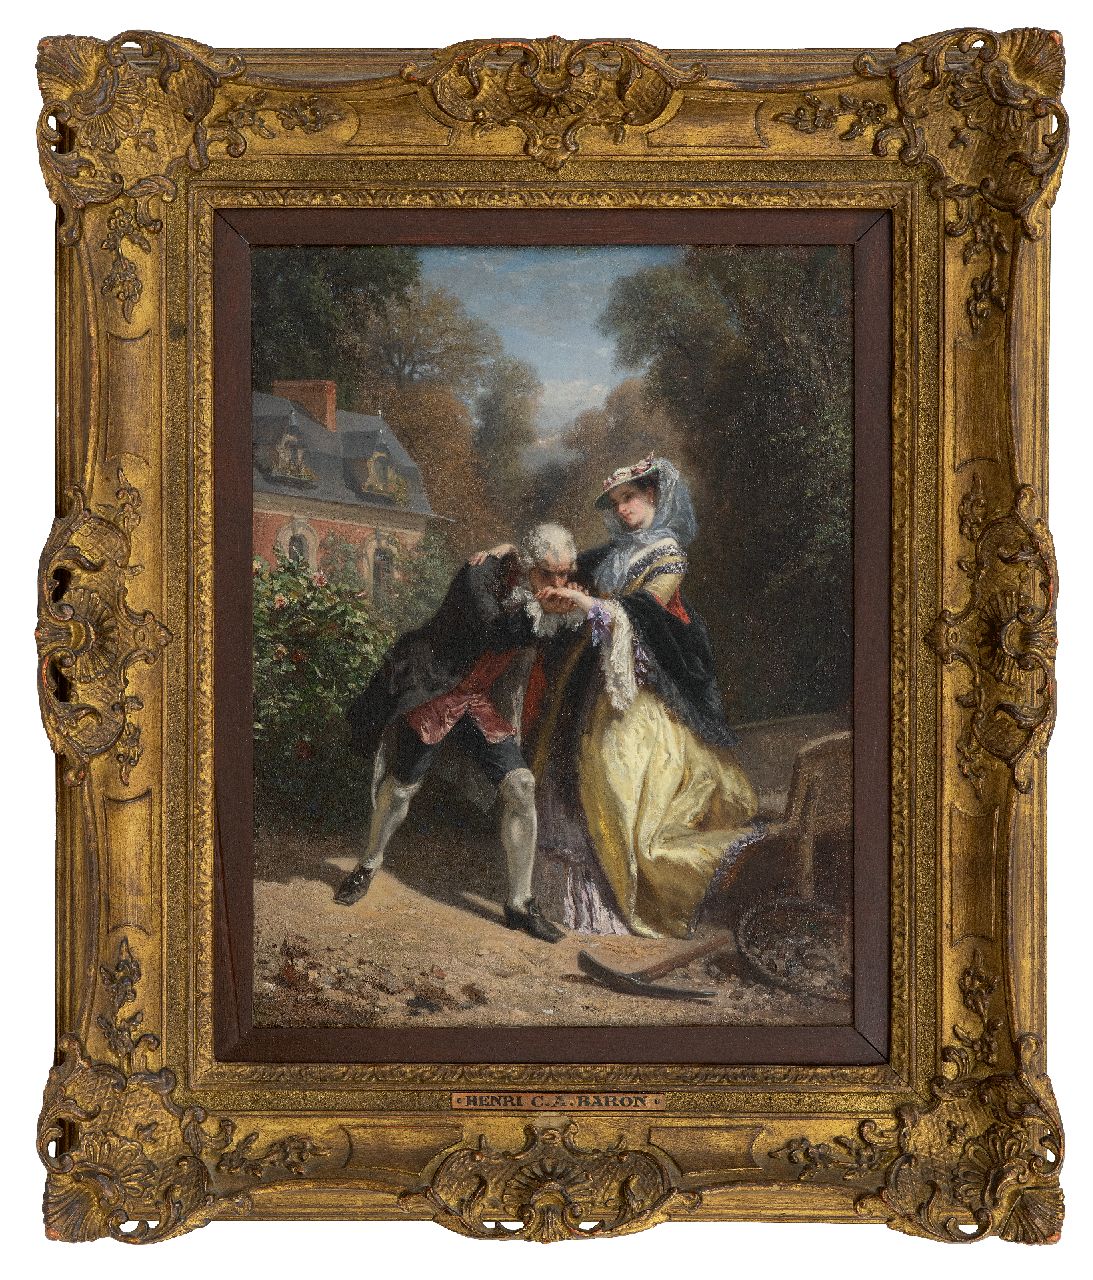 Baron H.C.A.  | 'Henri' Charles Antoine Baron | Paintings offered for sale | The hand kiss, oil on panel 36.2 x 28.3 cm, signed c.r.